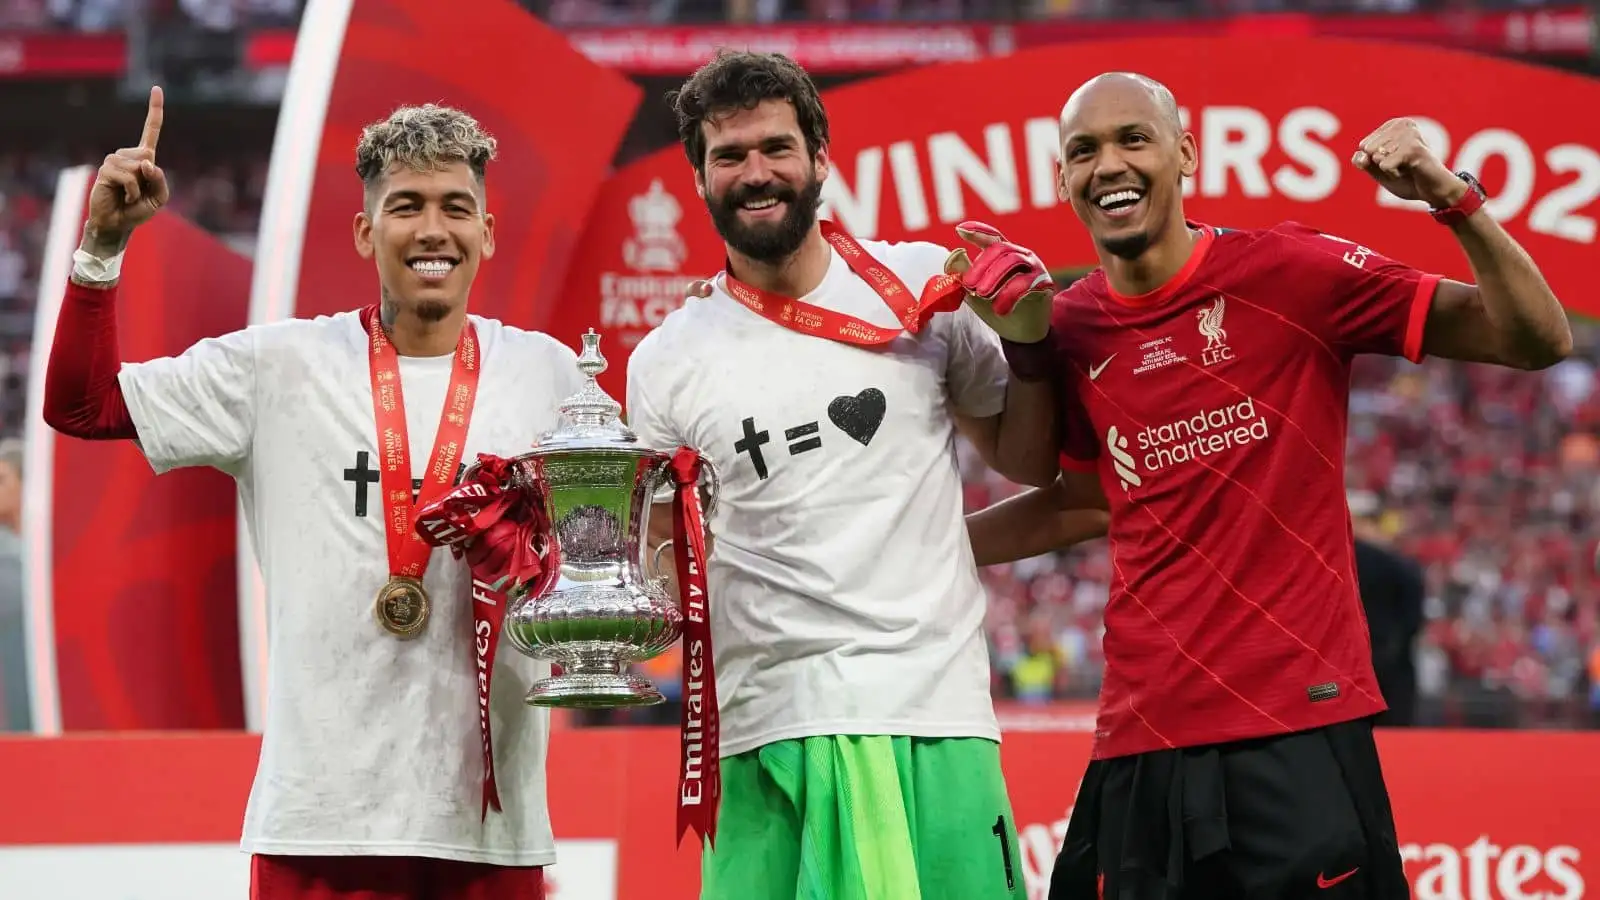 Roberto Firmino (left), goalkeeper Alisson (centre) and Fabinho of Liverpool FC pose with the trophy after the Emirates FA Cup final at Wembley Stadium